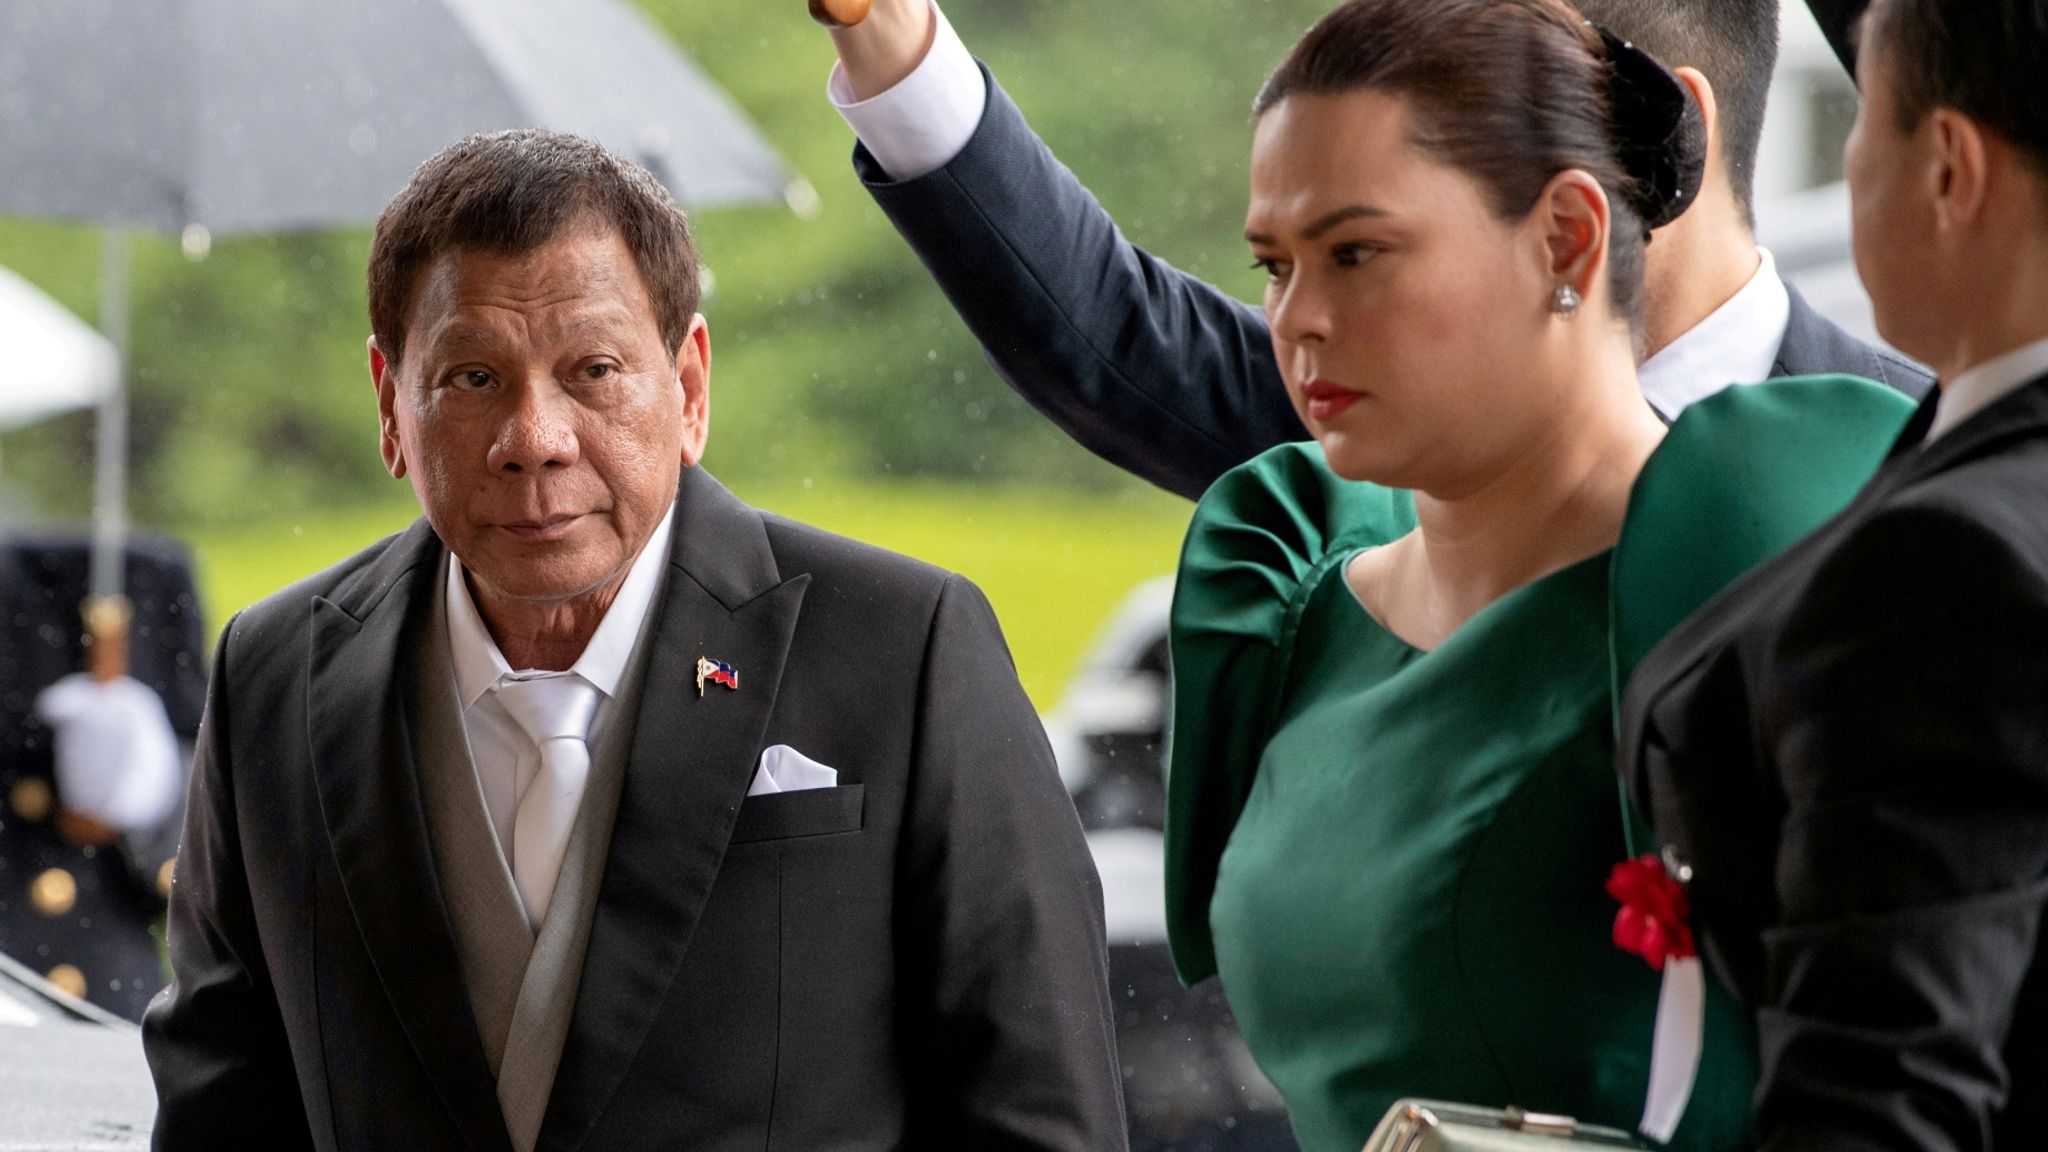 Sara Duterte-Carpio: Daughter of Philippines leader runs for vice president  - and could compete against her father | World News | Sky News